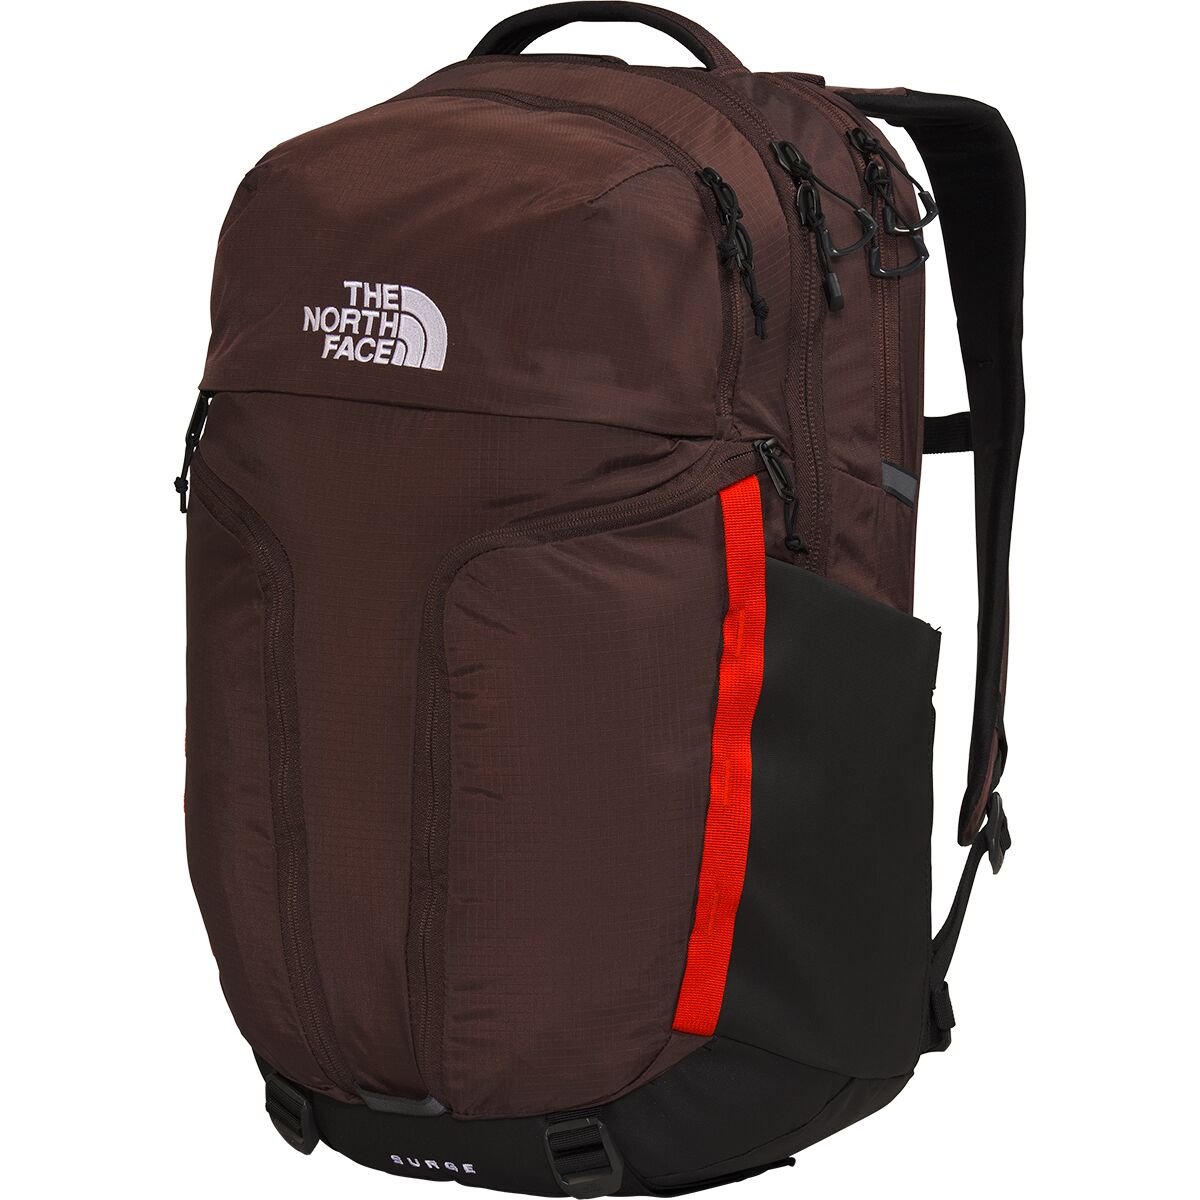 The North Face Surge 31L Backpack